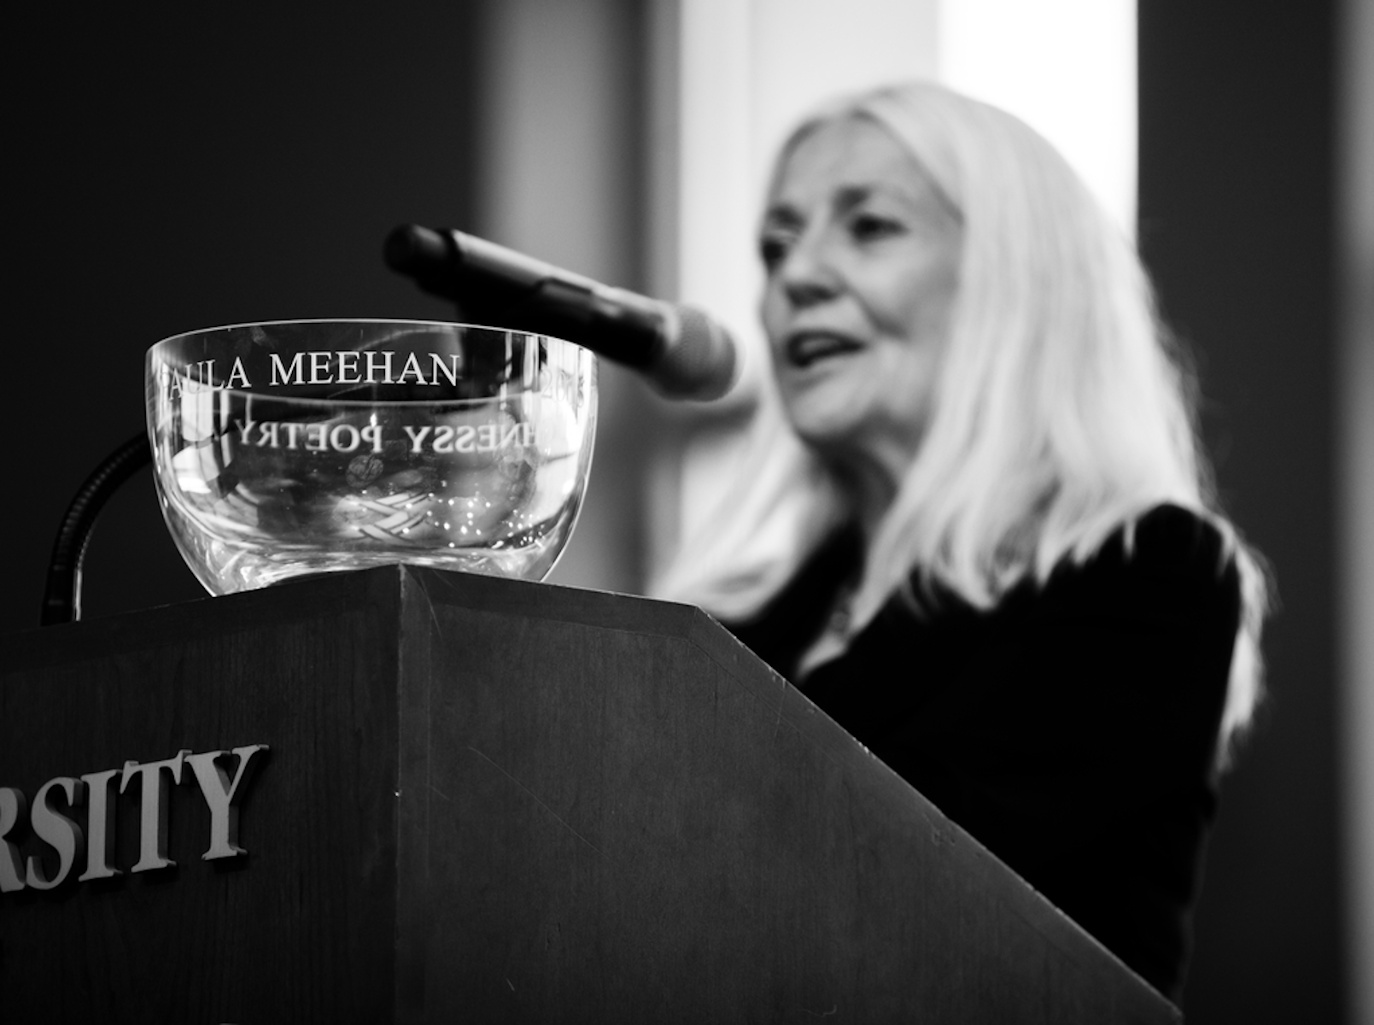 Paula Meehan accepts the Lawrence O’Shaughnessy Award for Poetry.